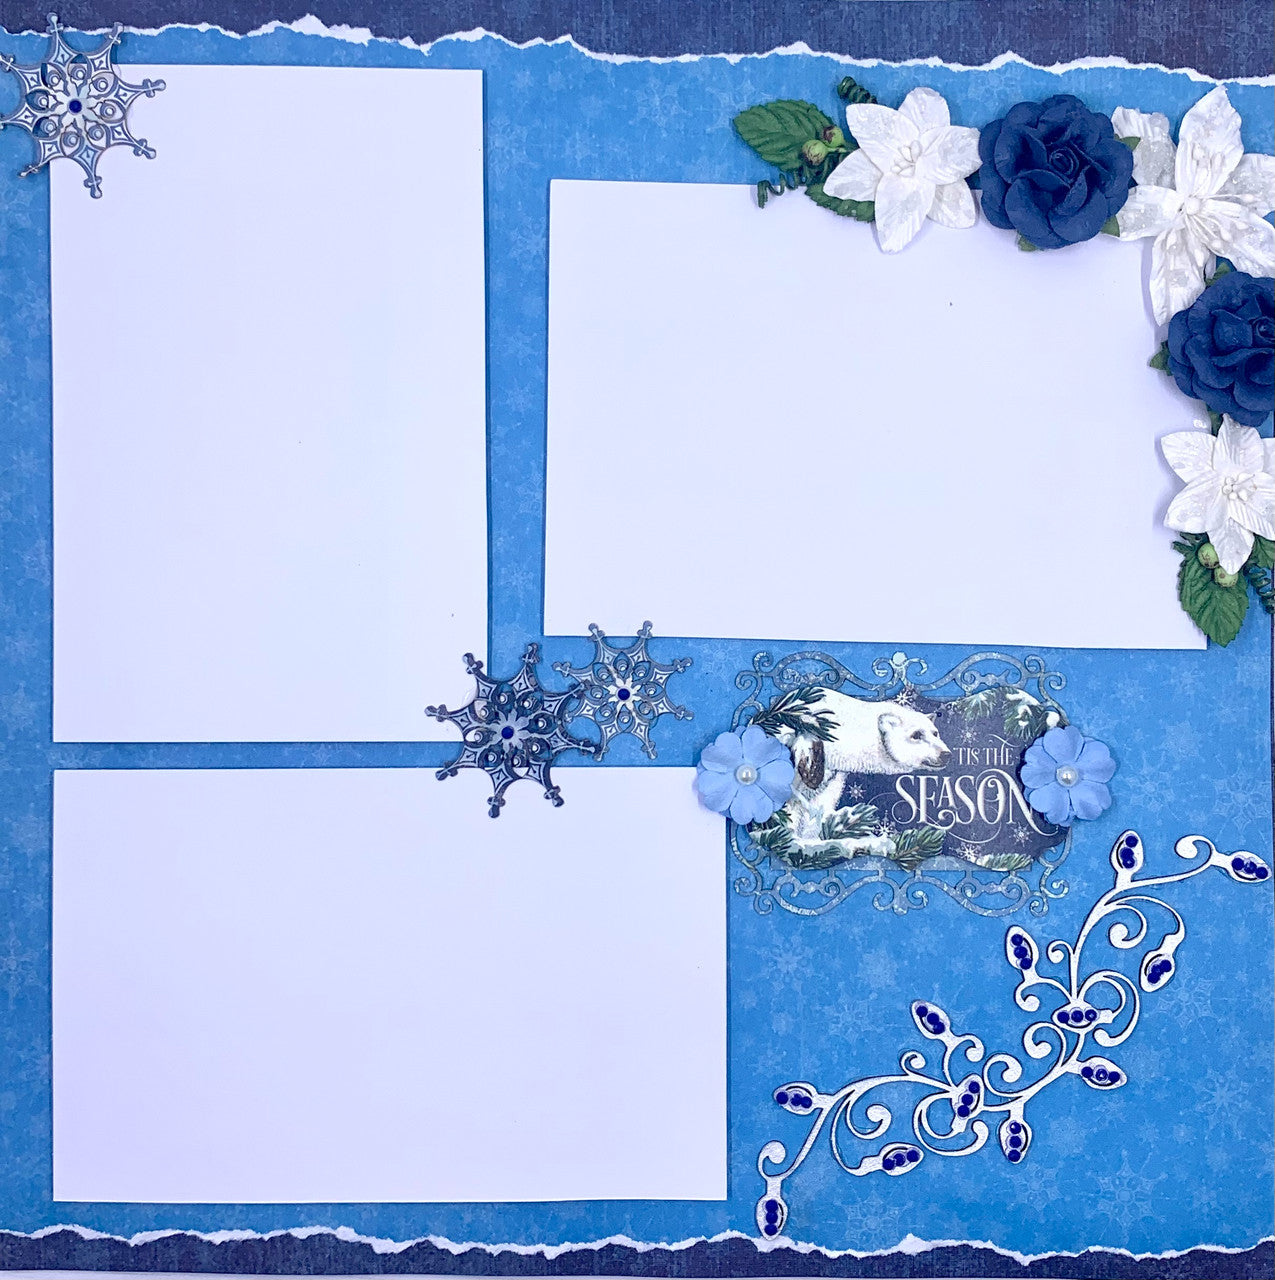 Let It Snow 2-Page Layout